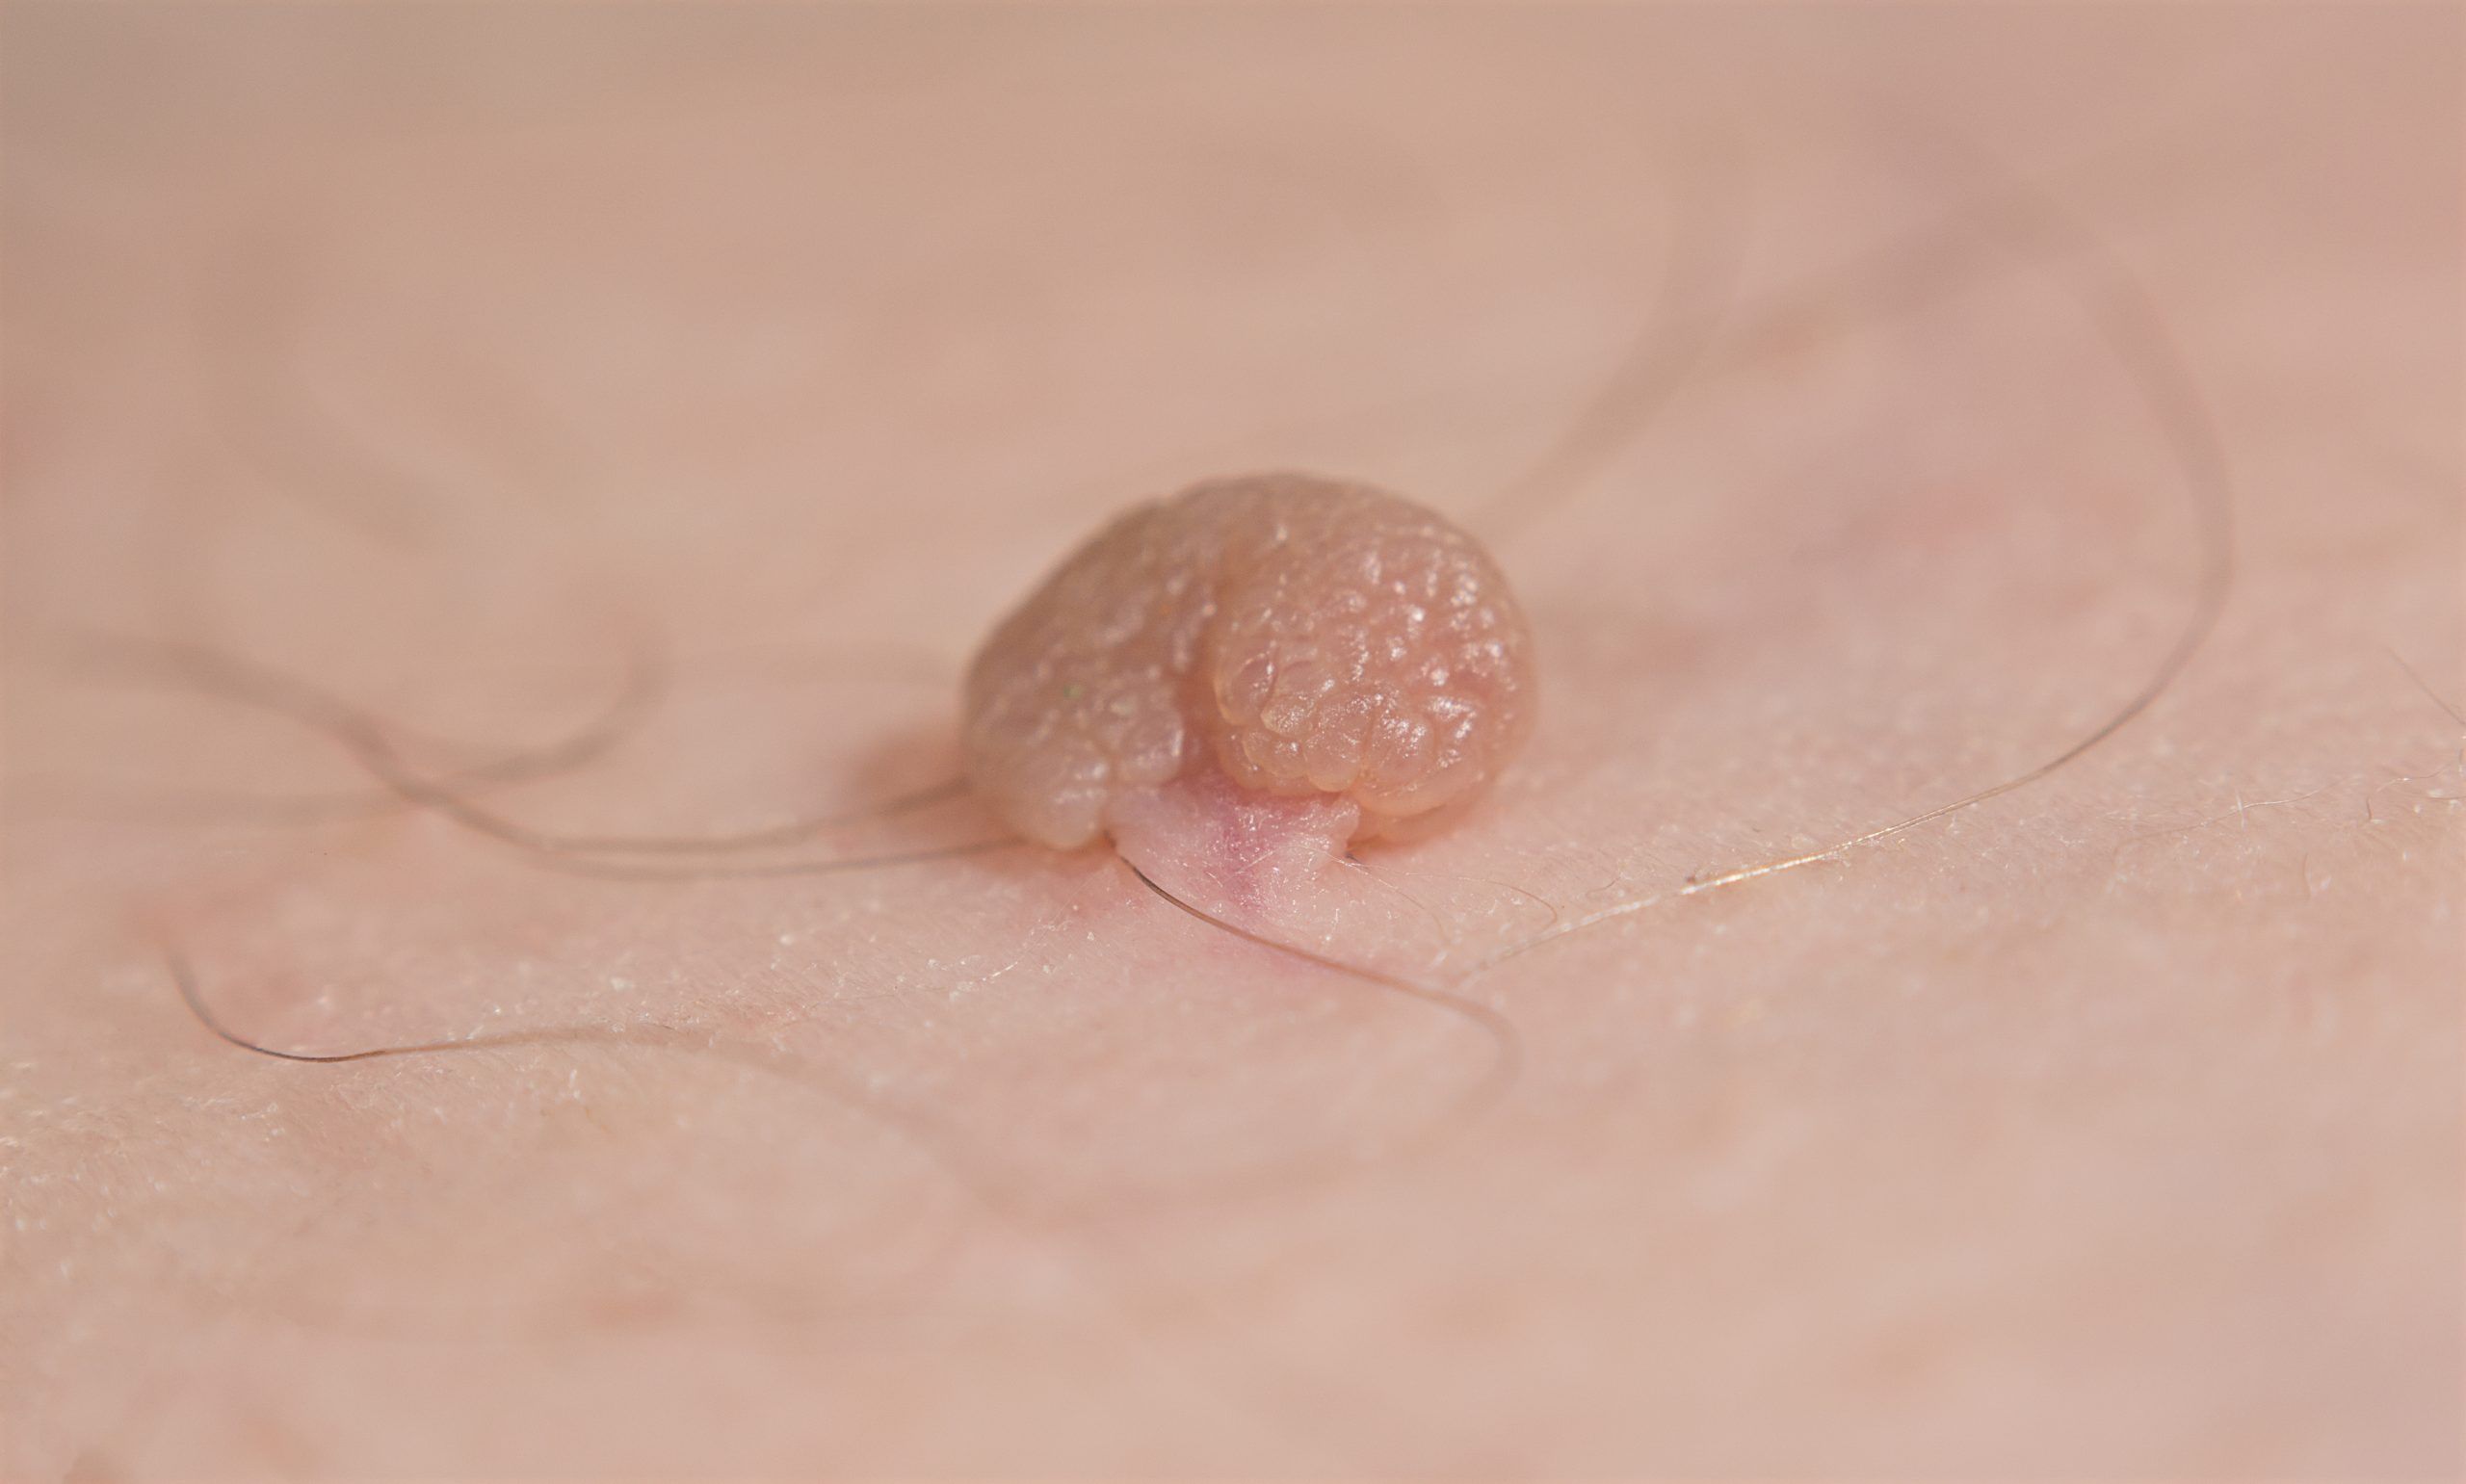 Skin tags can be annoying, but they are usually harmless. Stock/Getty